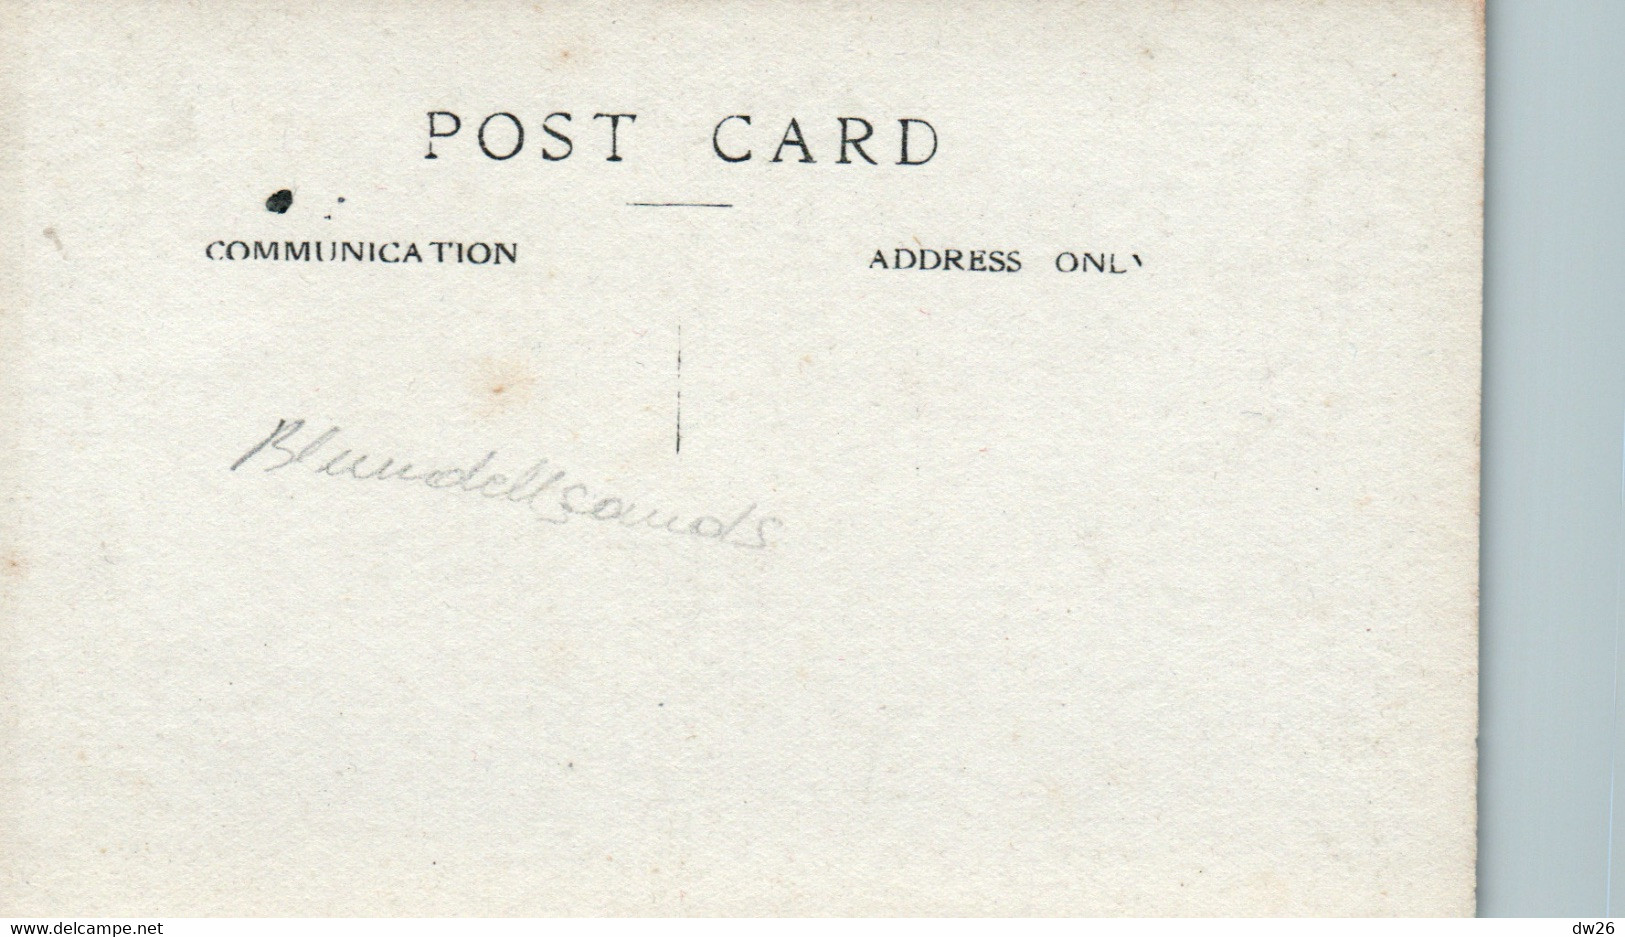 Liverpool - Road West, Blundellsands - Old Post Card Non Circulated - Liverpool